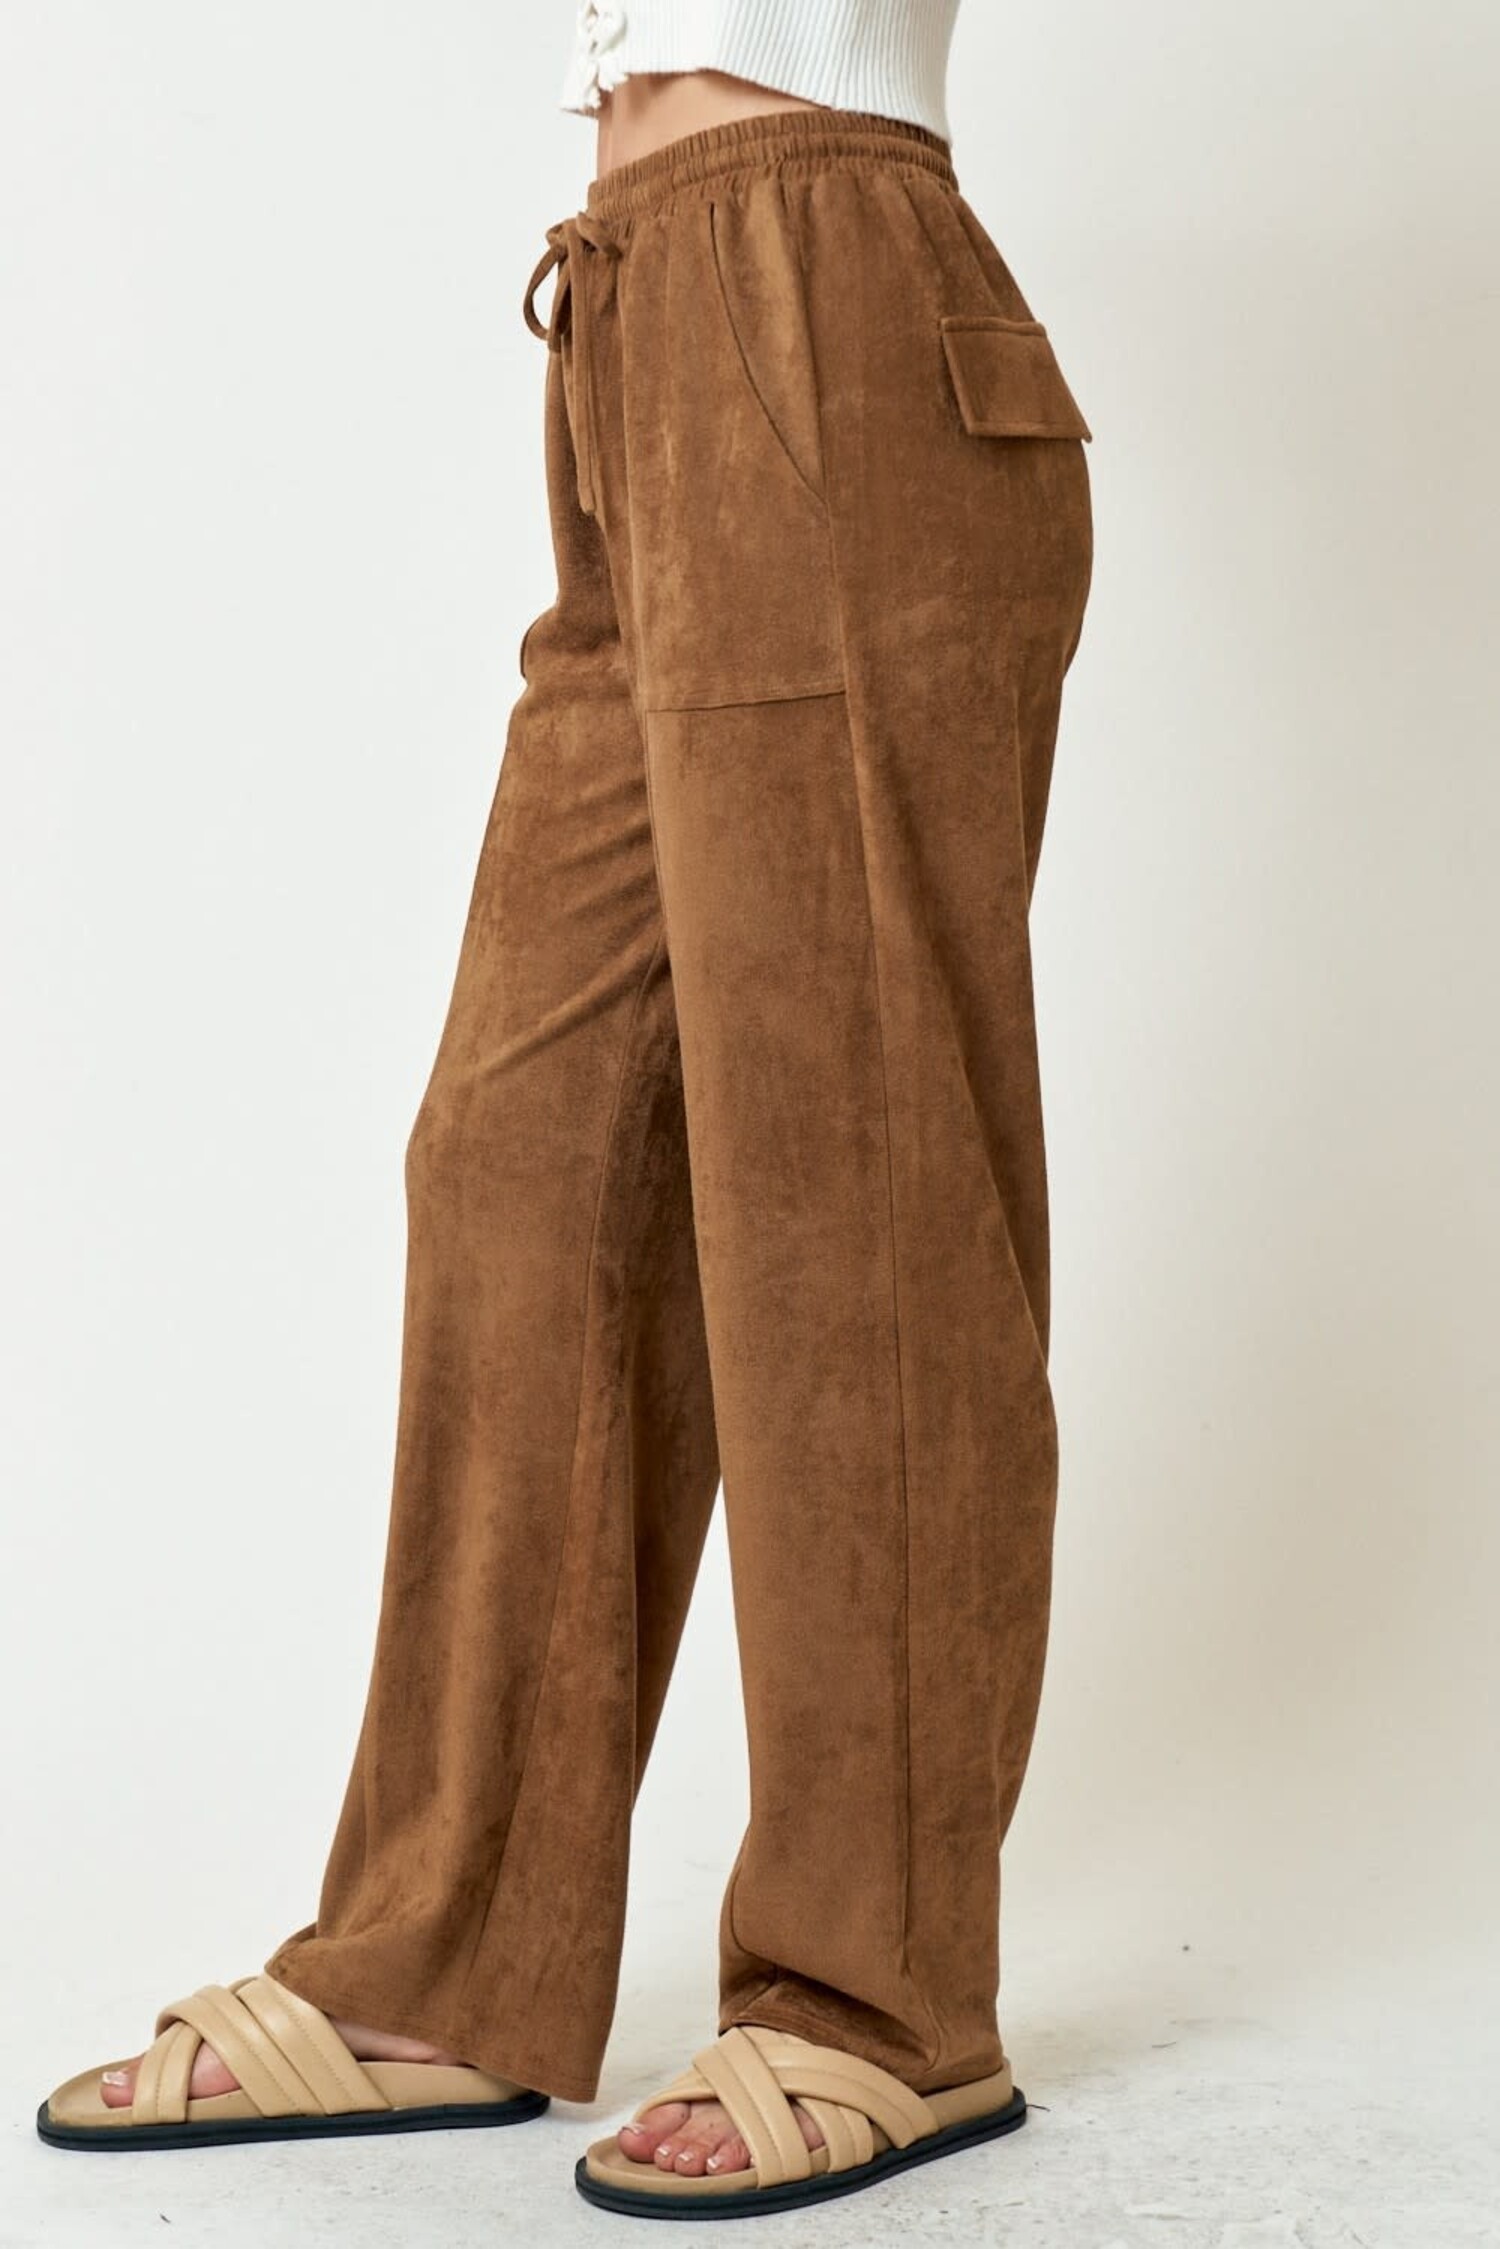 Vintage Suede Pants High Waist Straight Leg Lined Brown Pants Womens 26W X  43L